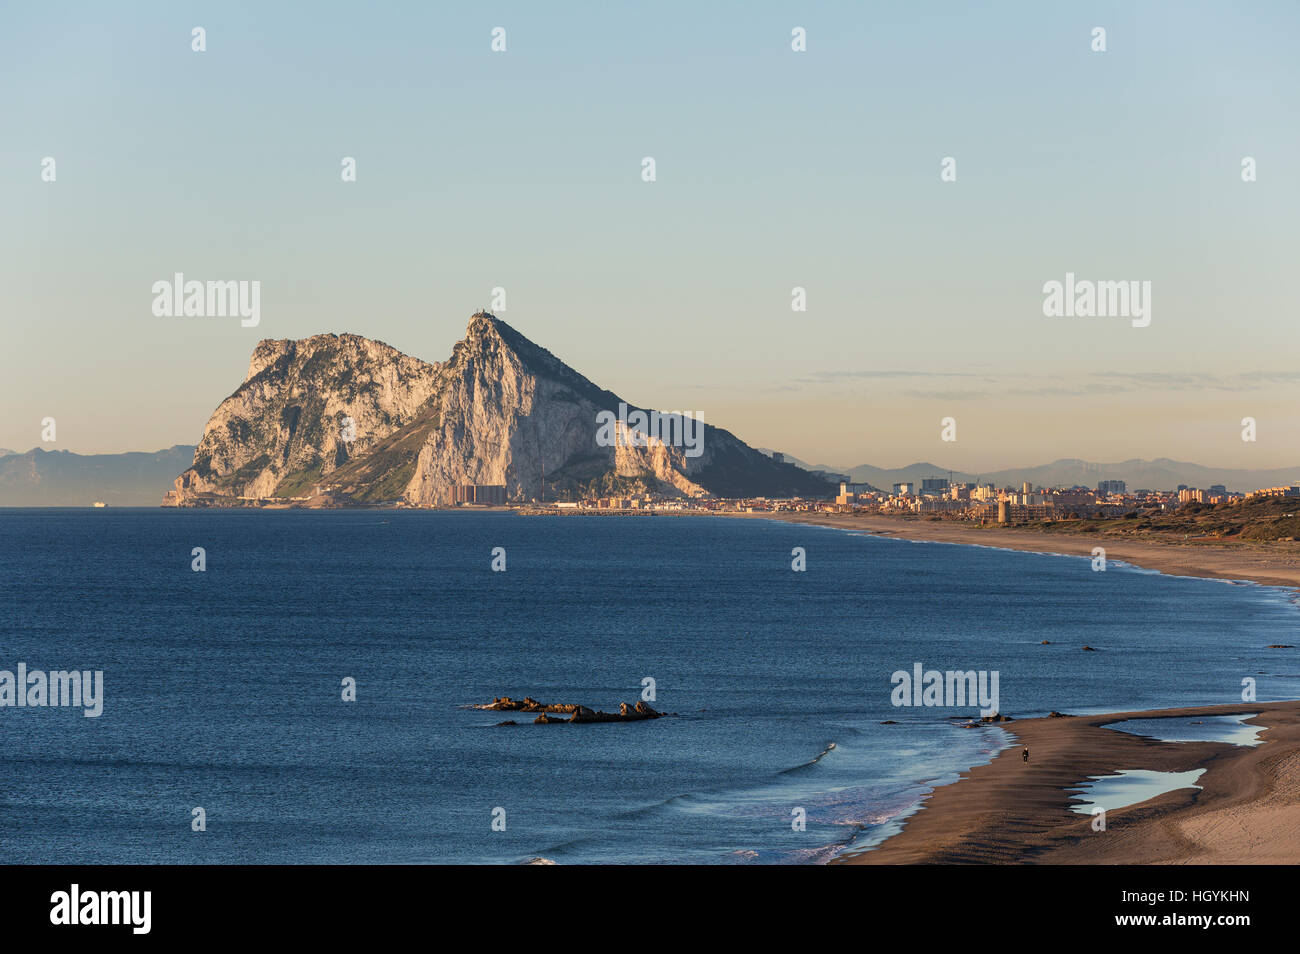 View of The Rock of Gibraltar and La Linea de la Concepcion as seen from the Mediterranean coast in the early morning light Stock Photo